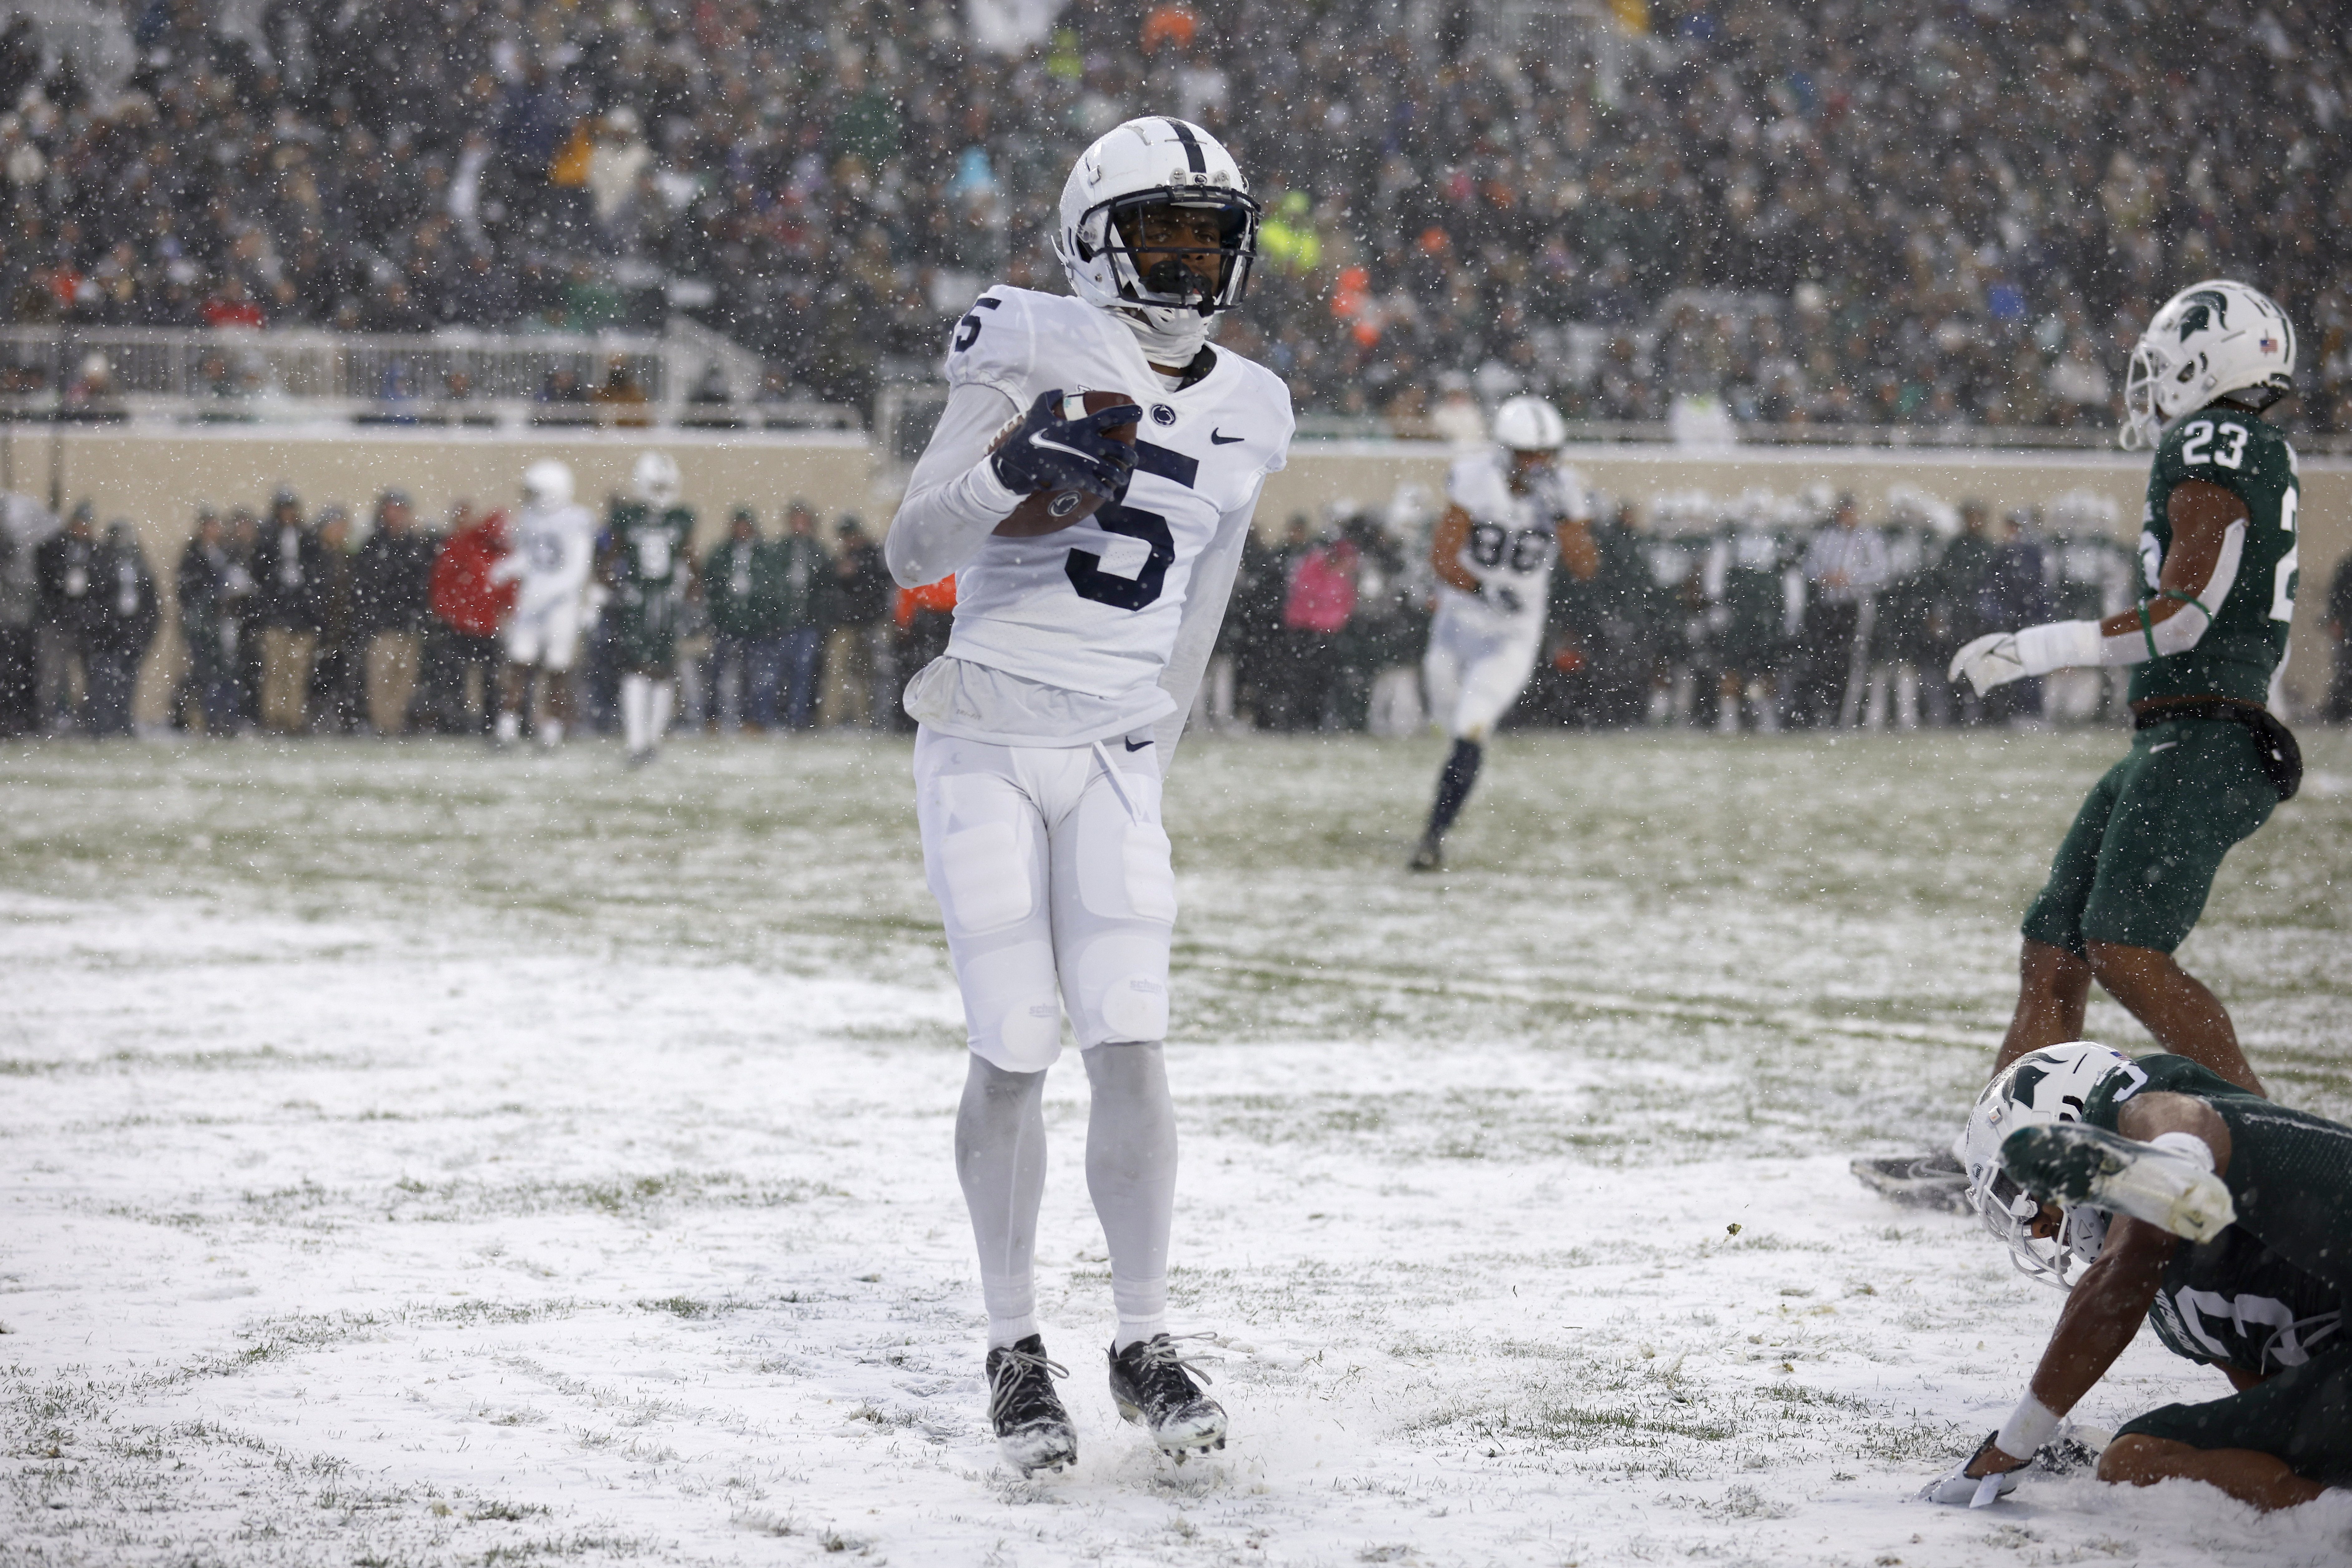 Penn State receiver Jahan Dotson will declare for the NFL draft